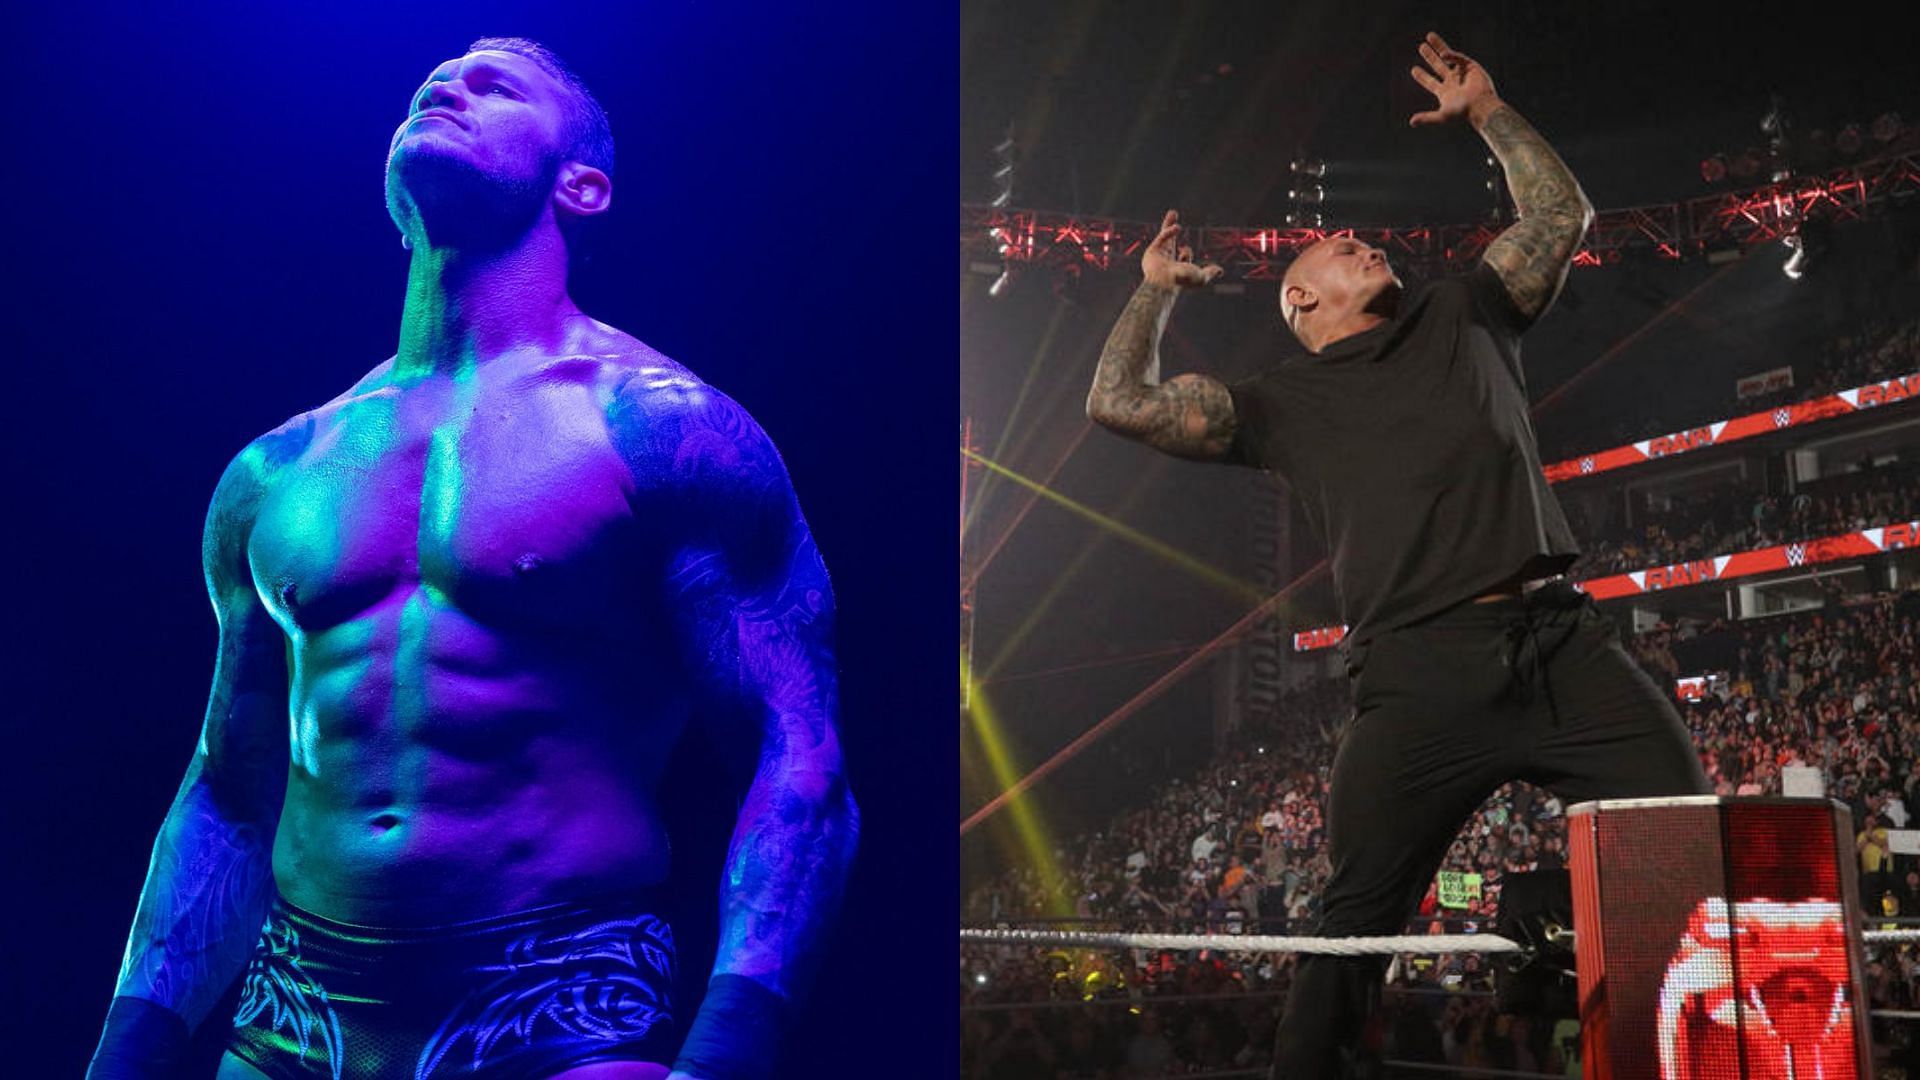 What is next for Randy Orton in WWE?